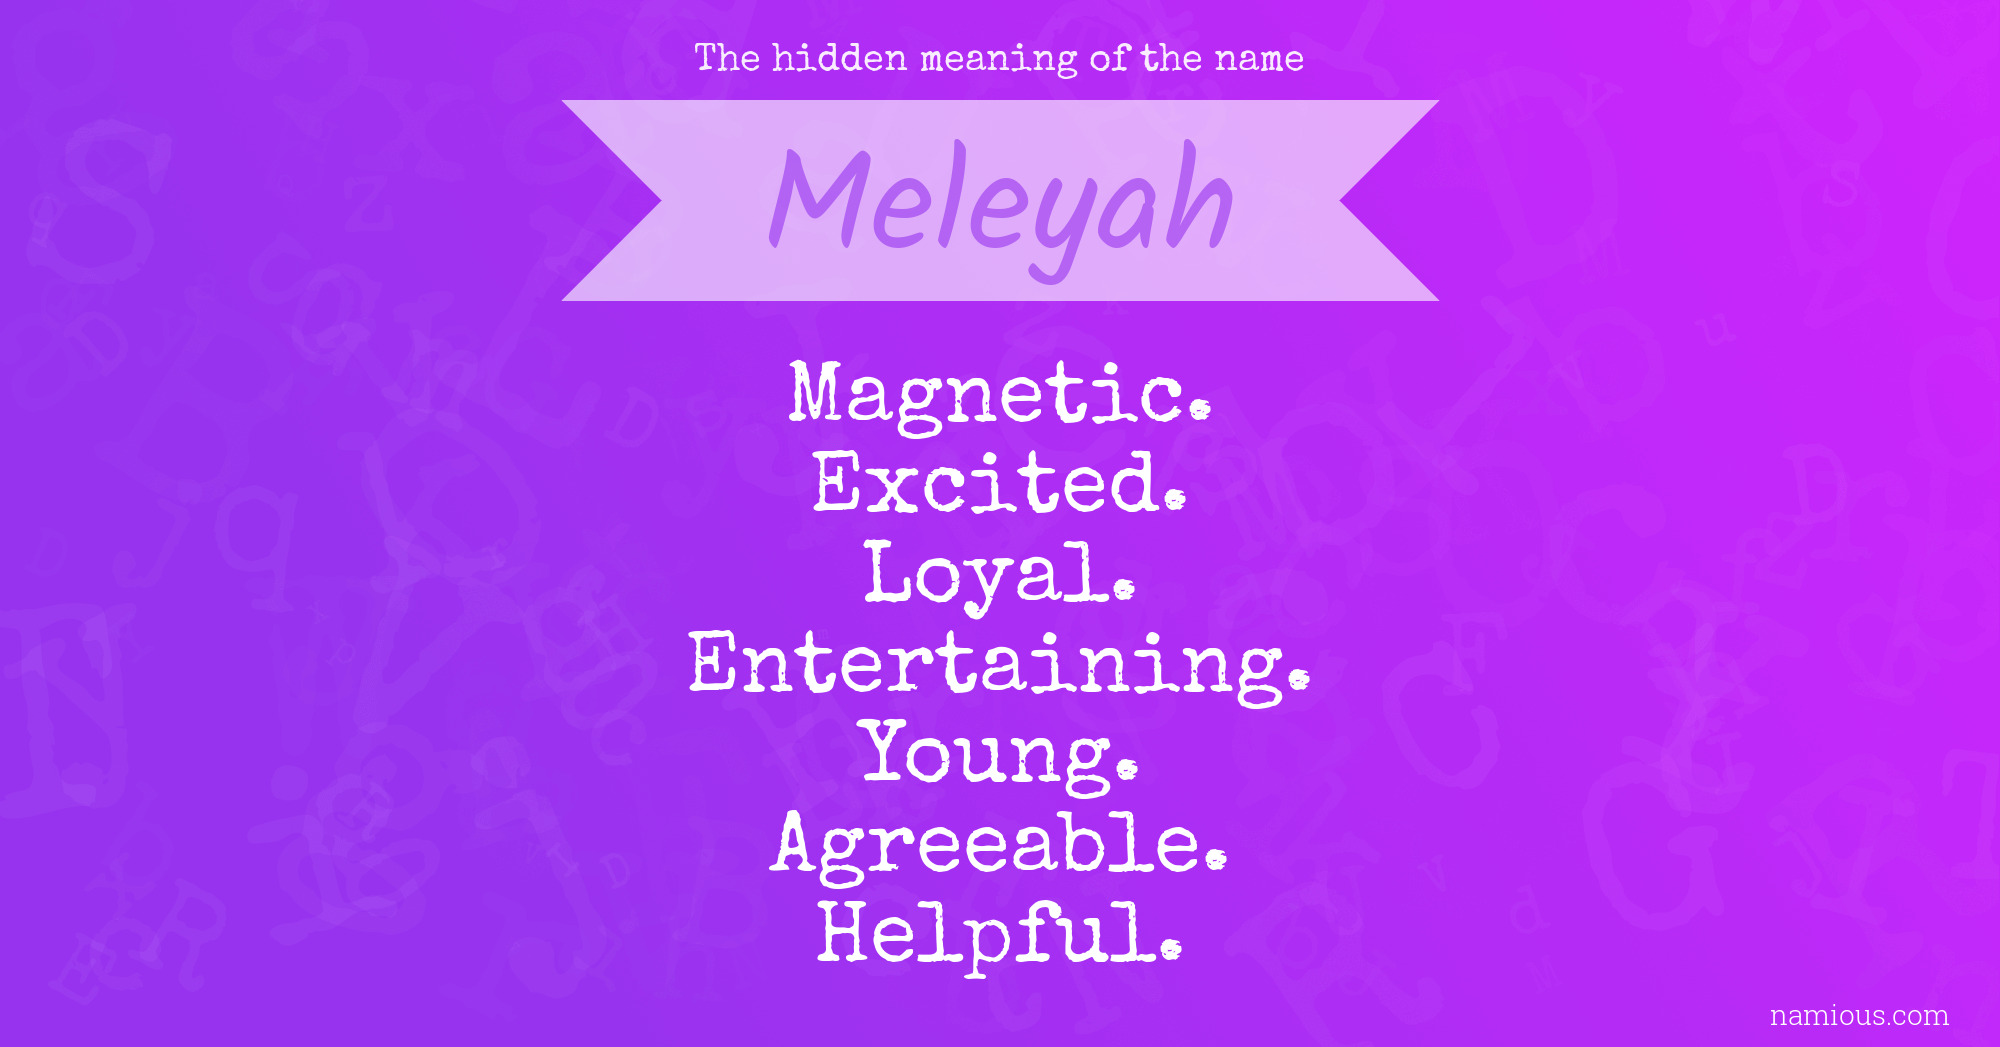 The hidden meaning of the name Meleyah